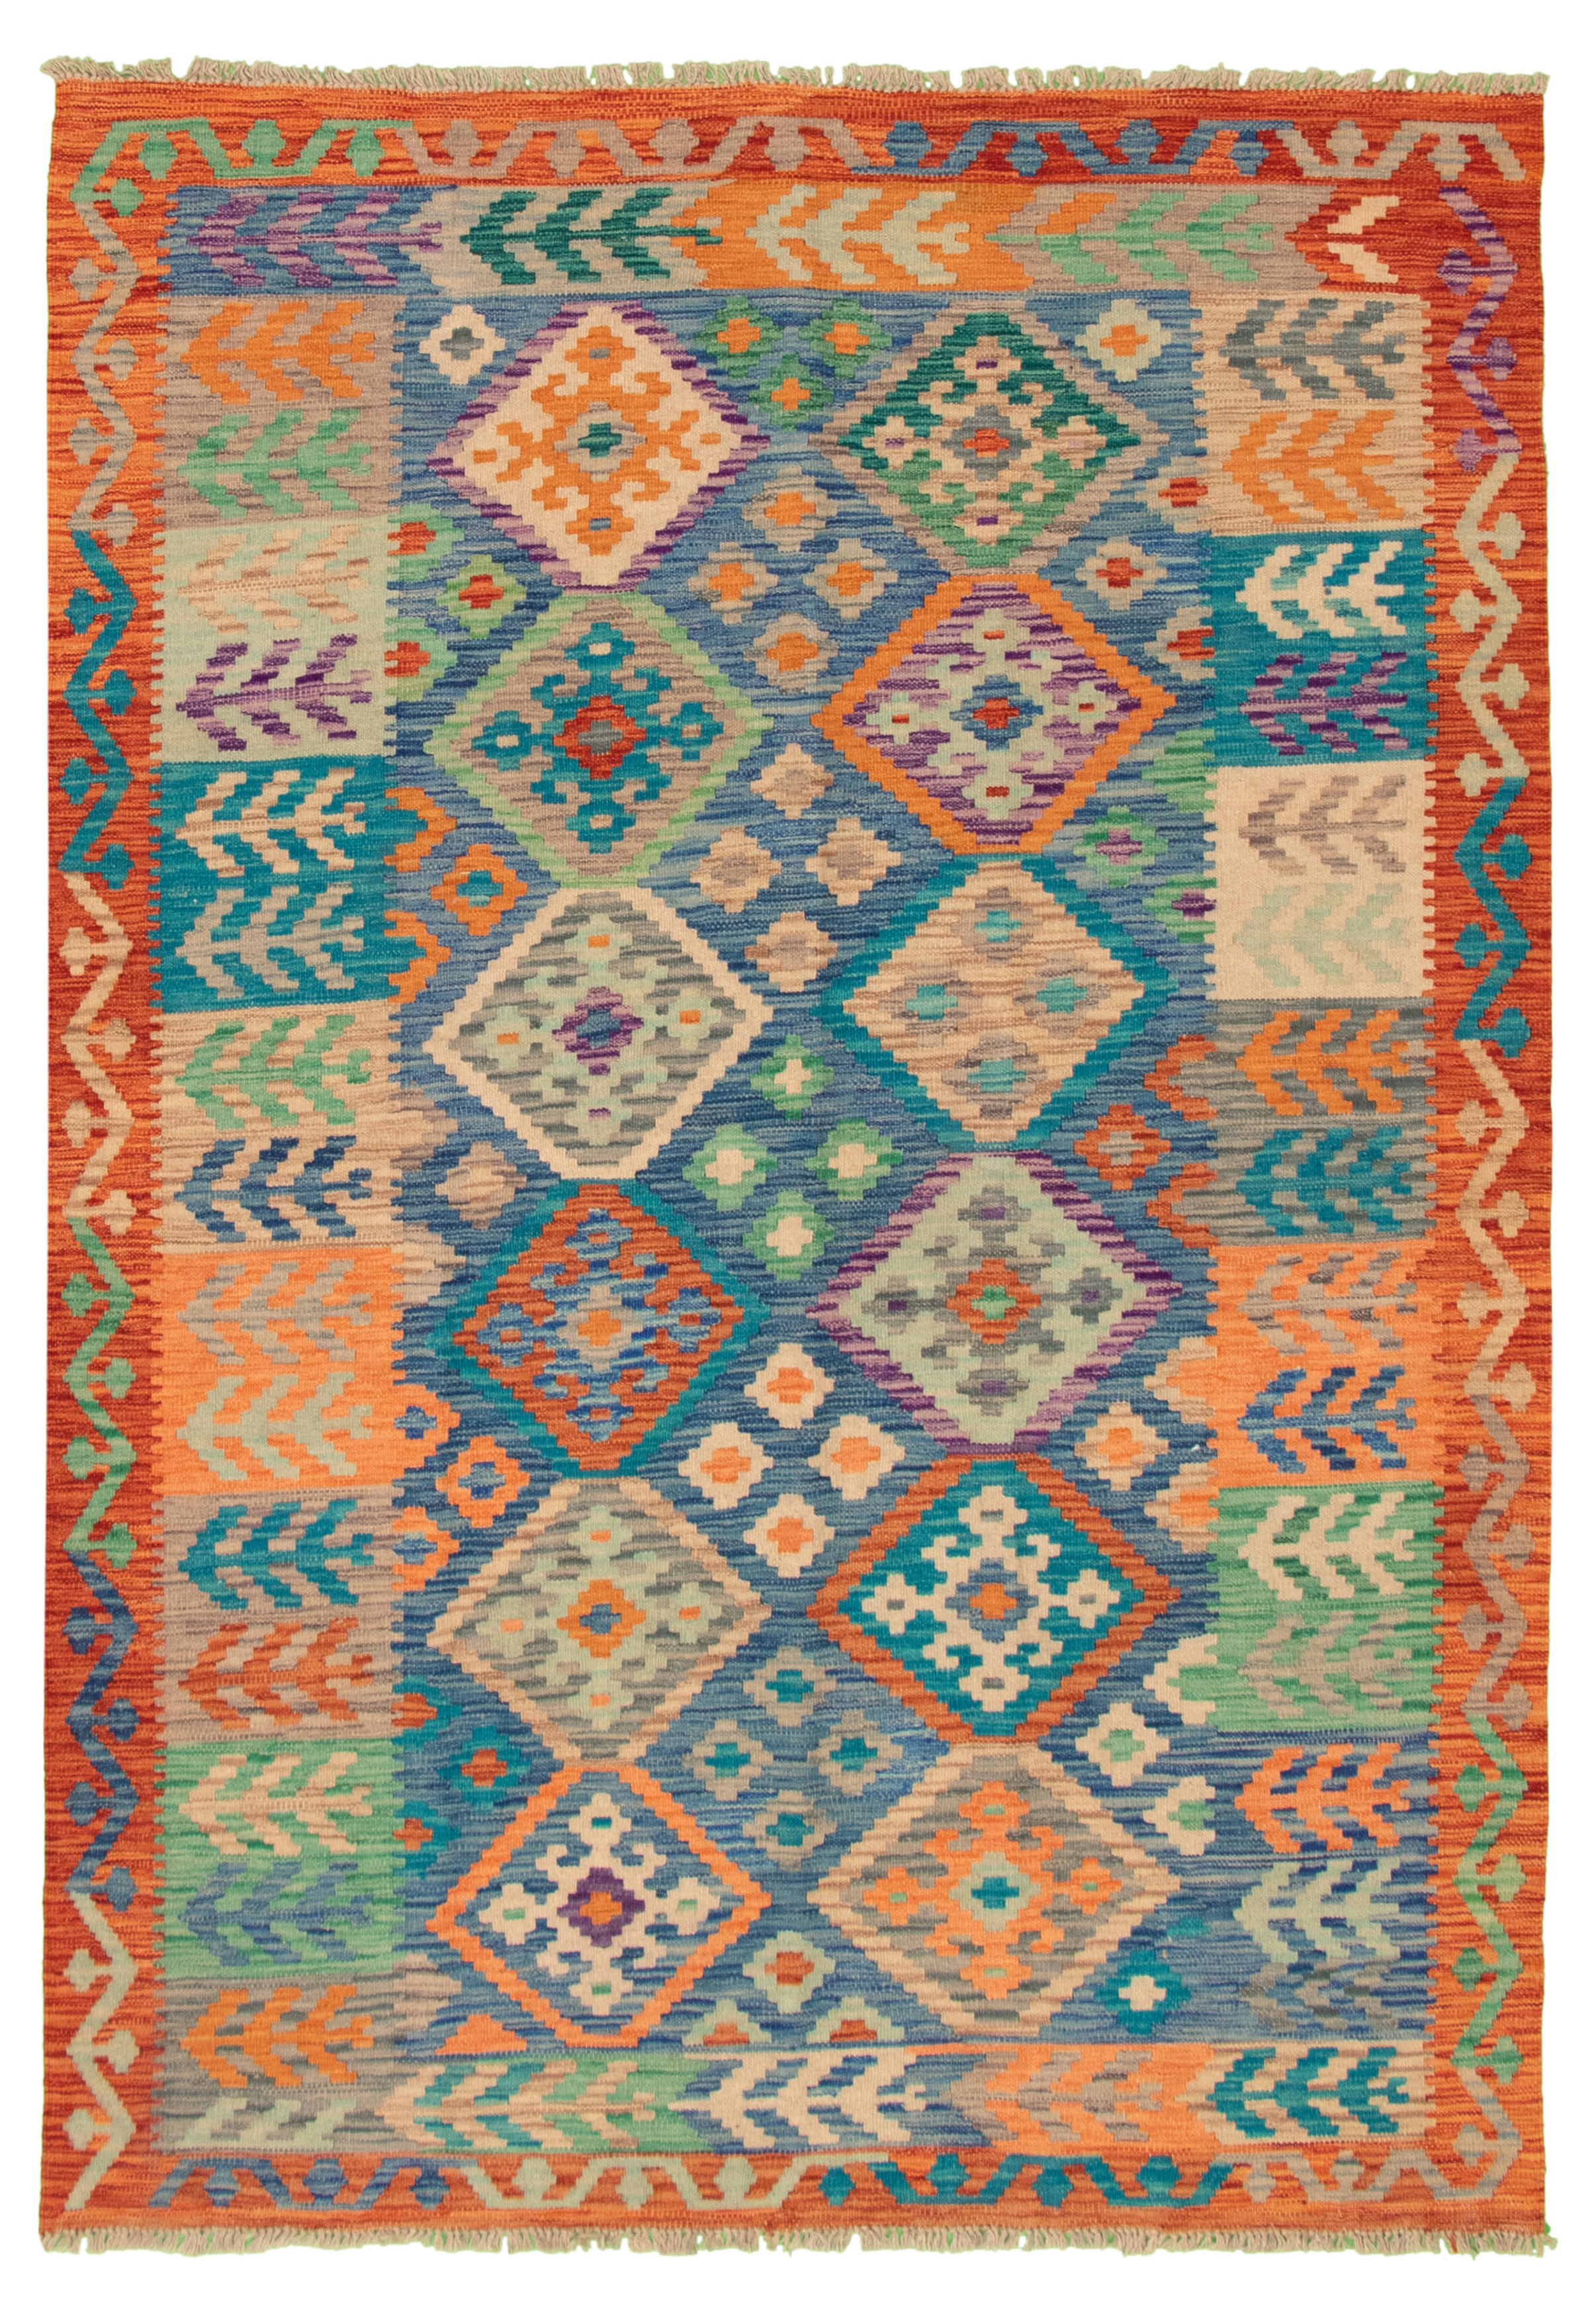 Hand woven Bold and Colorful  Turquoise Wool Kilim 5'10" x 8'0" Size: 5'10" x 8'0"  